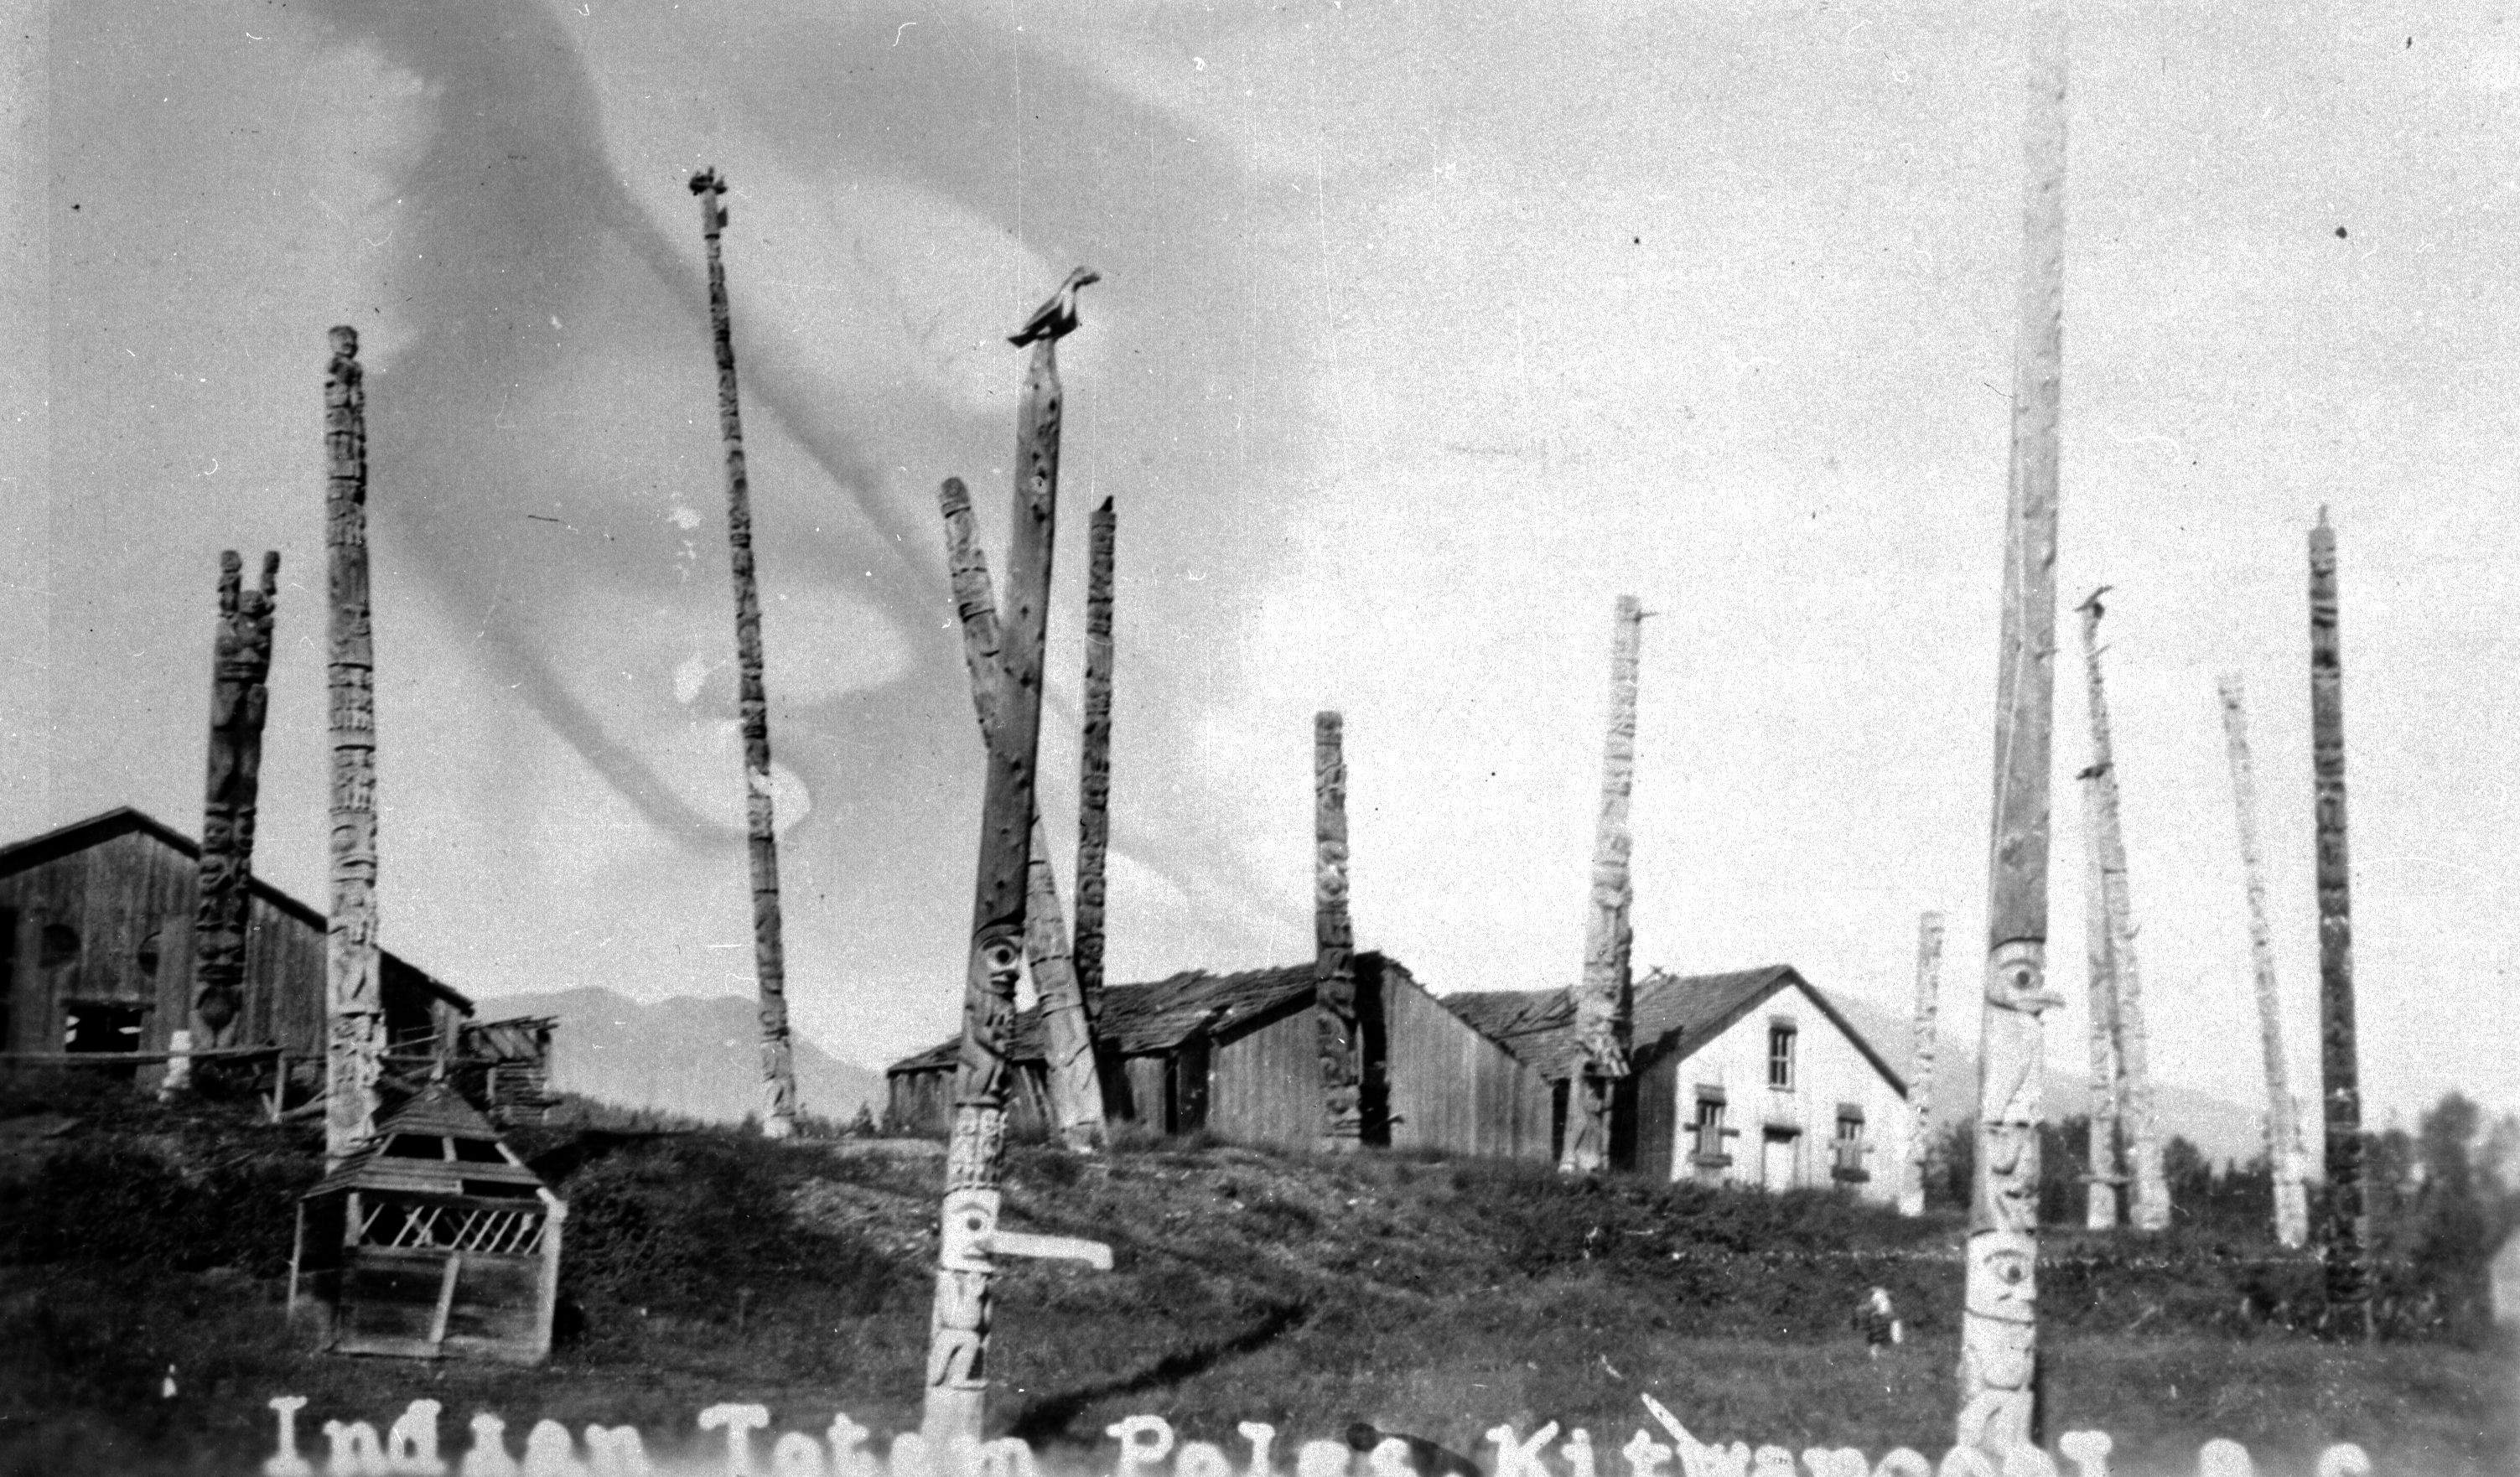 View of village houses and many poles.